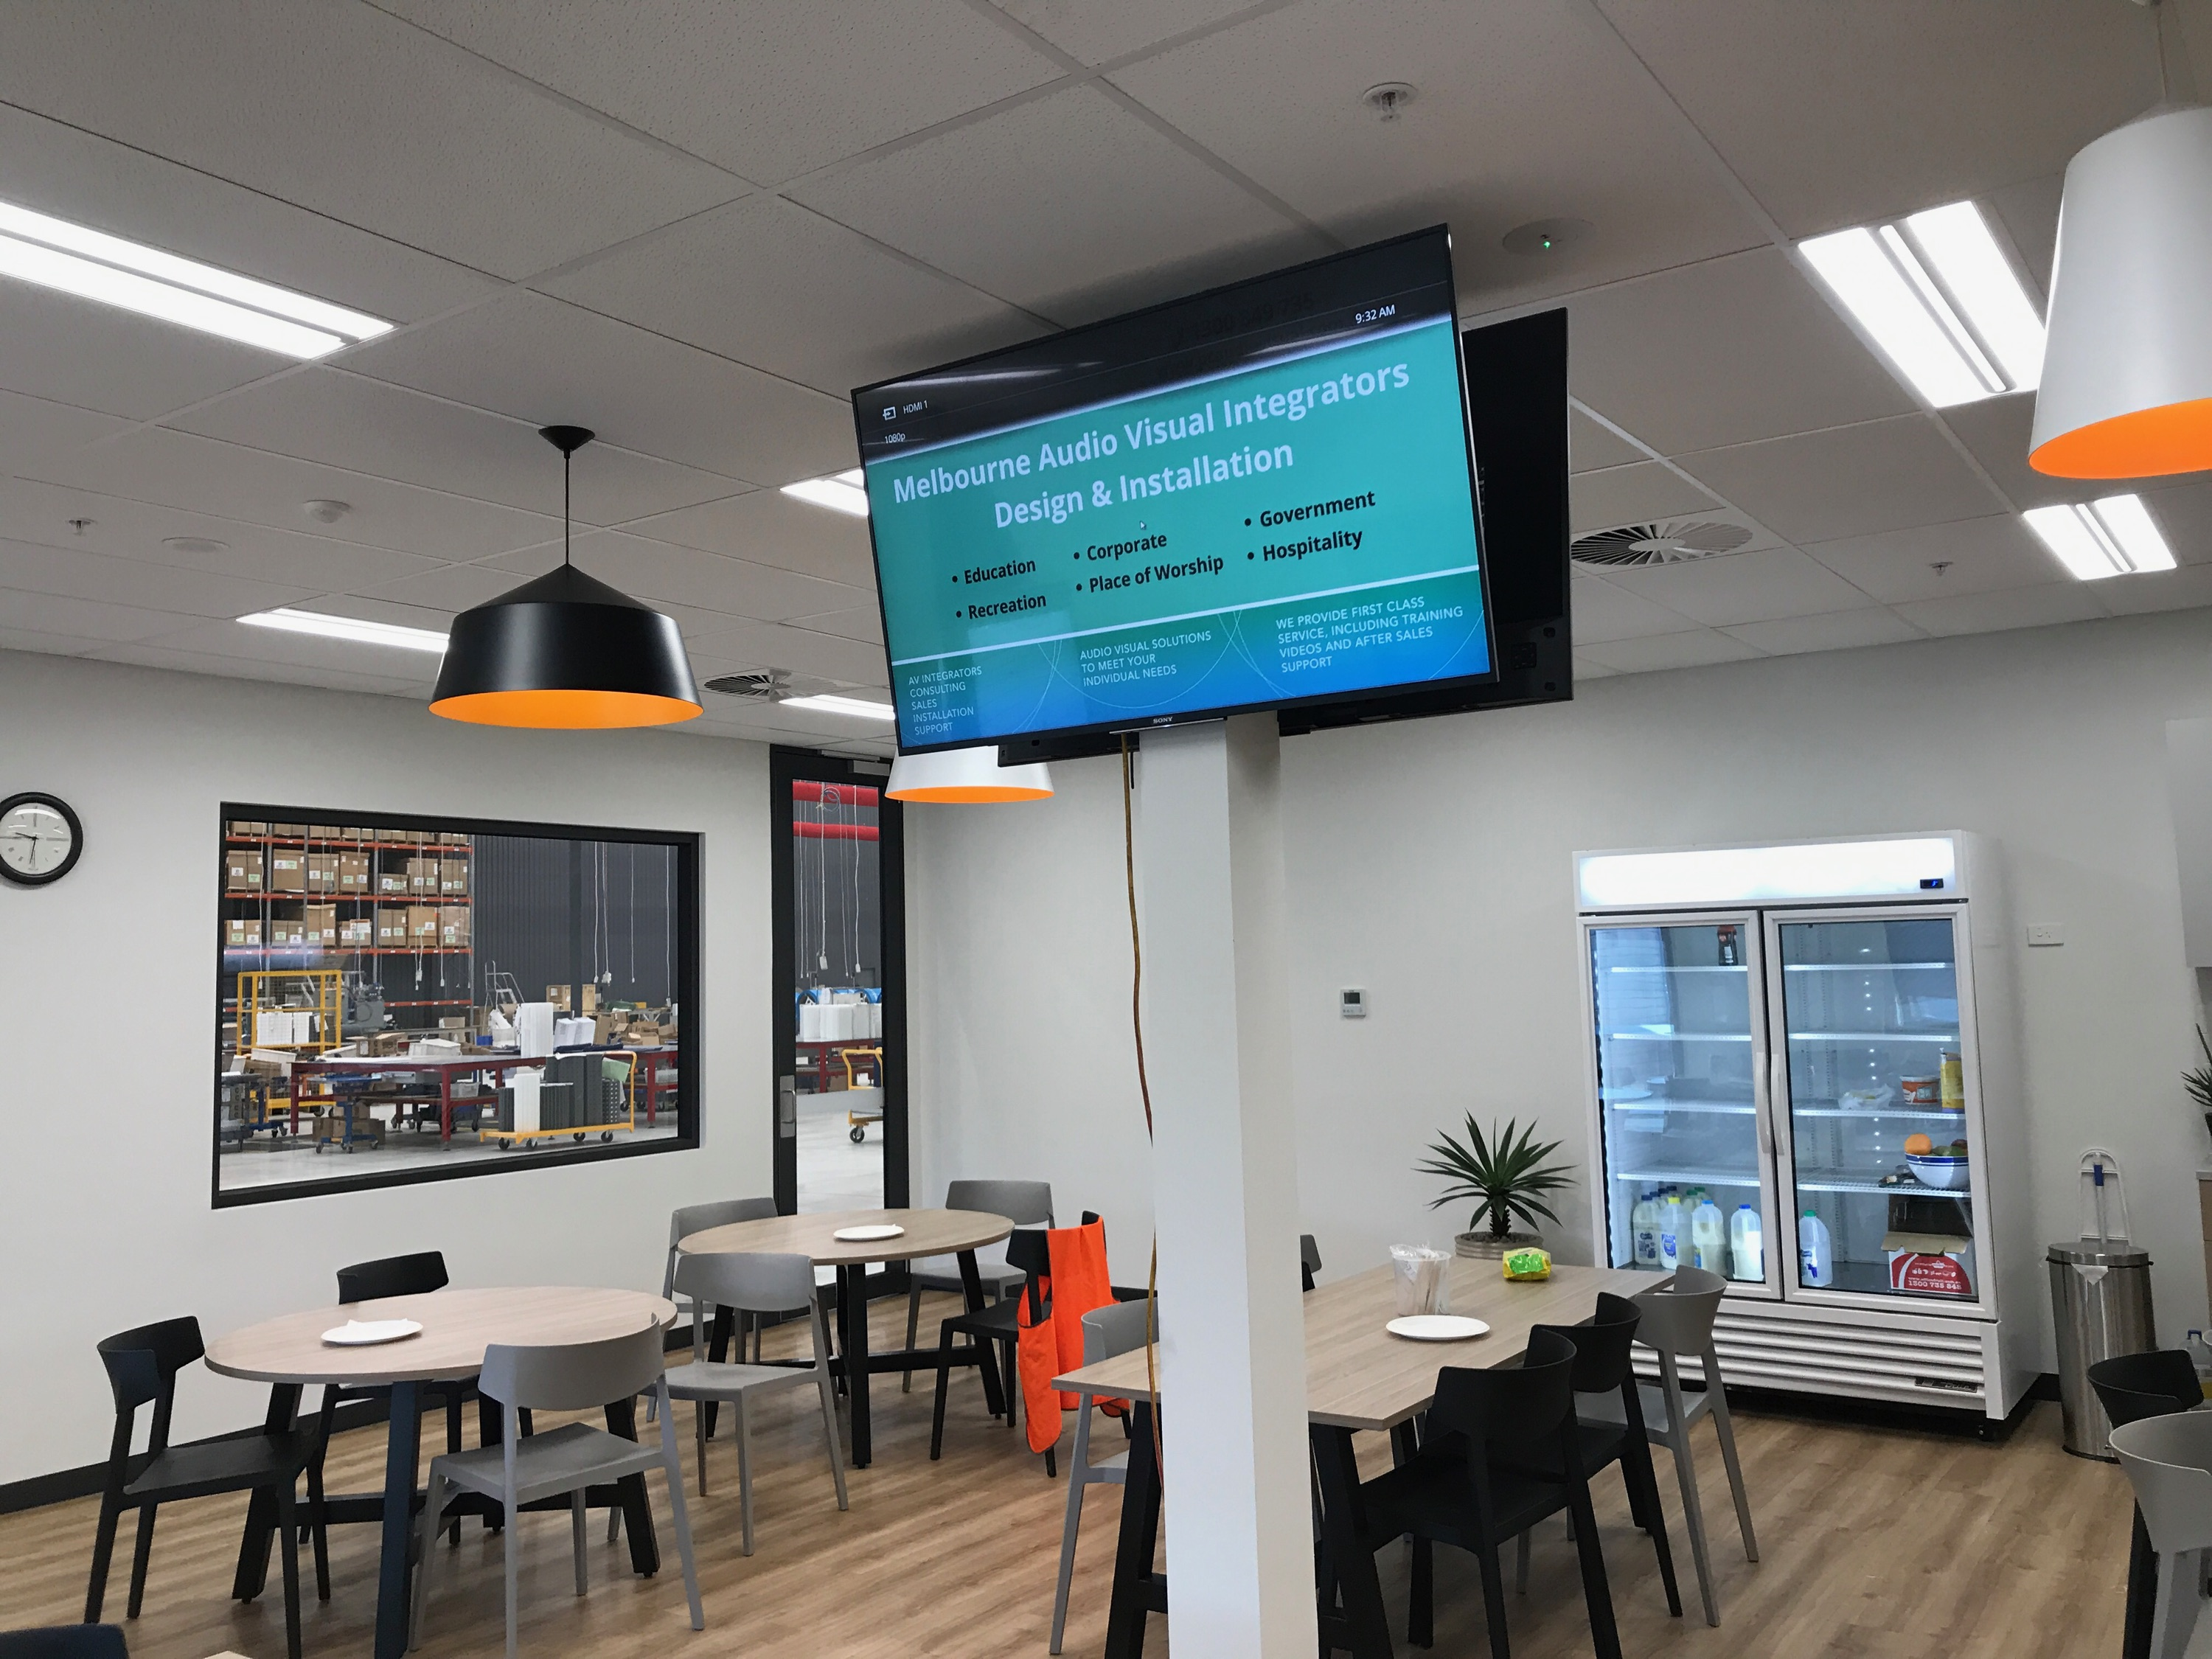 Screen Installation | Corporate Epping PC Audio Visual Melbourne